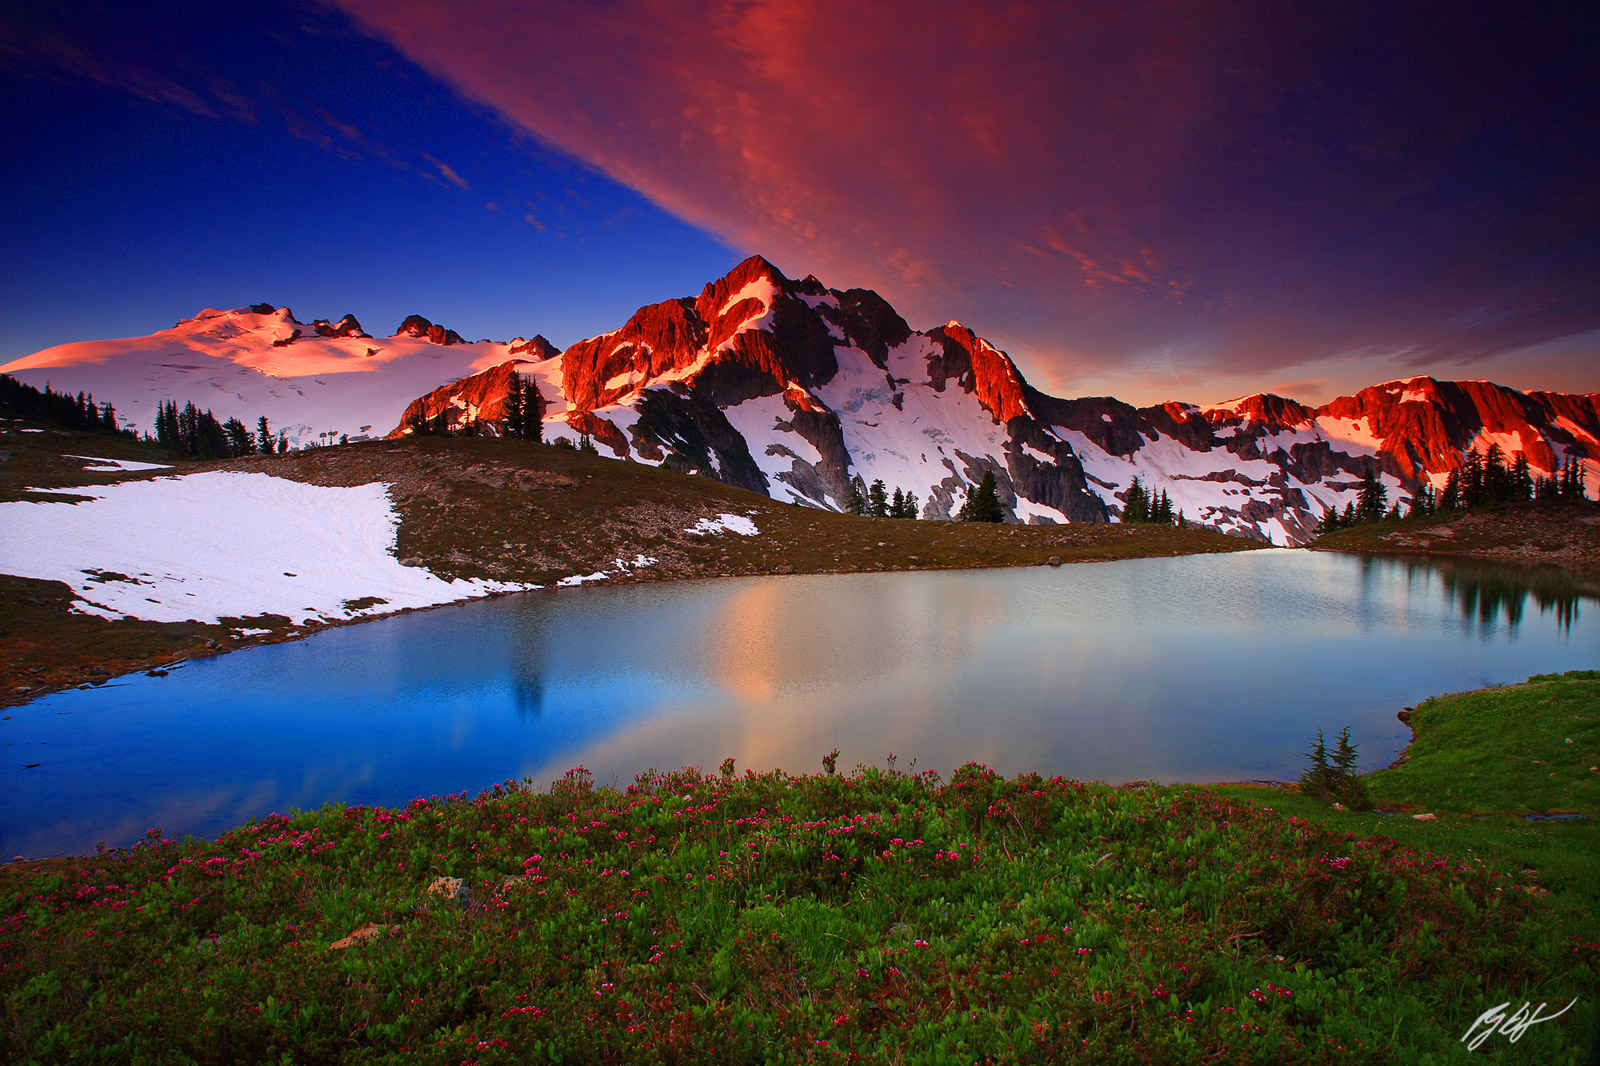 Sunrise Whatcom Peak and Mt Challenger with Taptoe Lakes in the North Cascades National Park in Washington